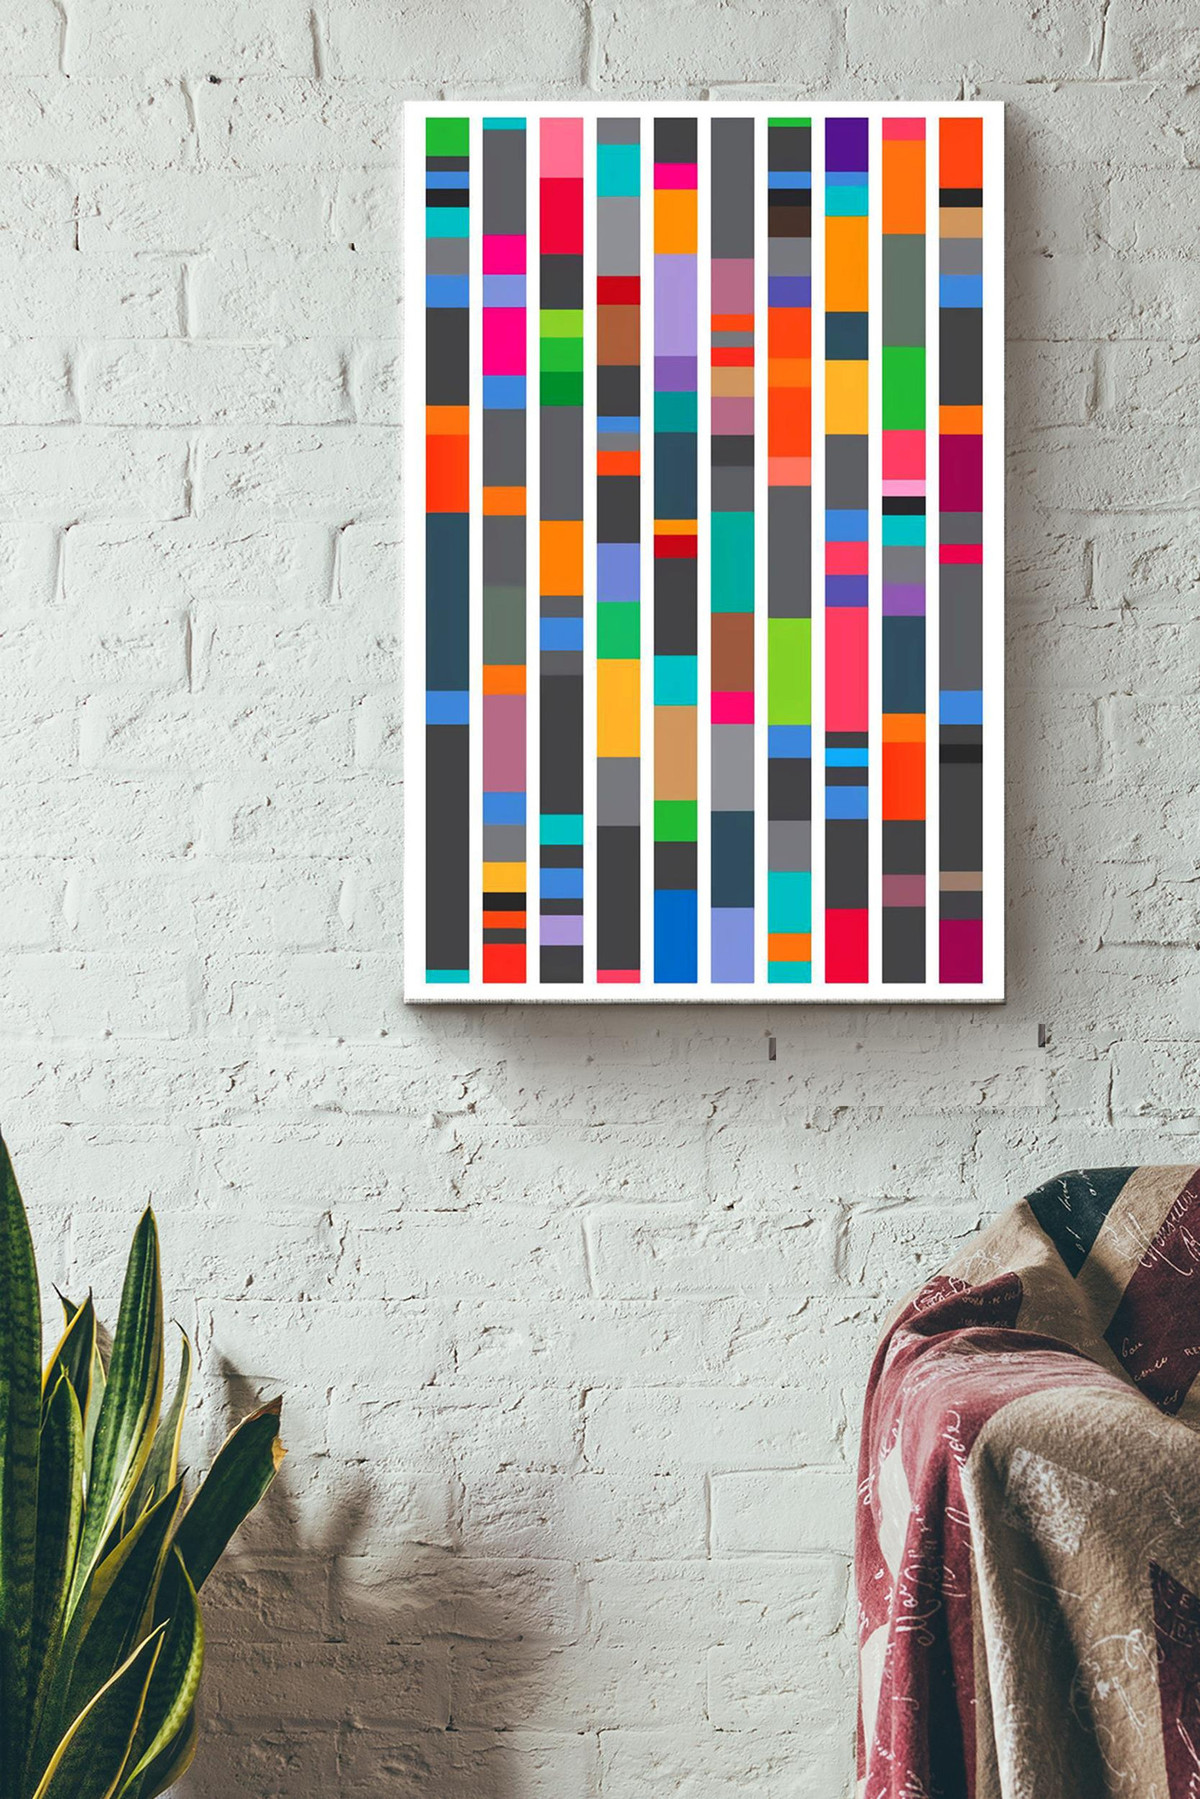 Biology Dna Colorful Canvas Painting Ideas, Canvas Hanging Prints, Gift Idea Framed Prints, Canvas Paintings Wrapped Canvas 8x10